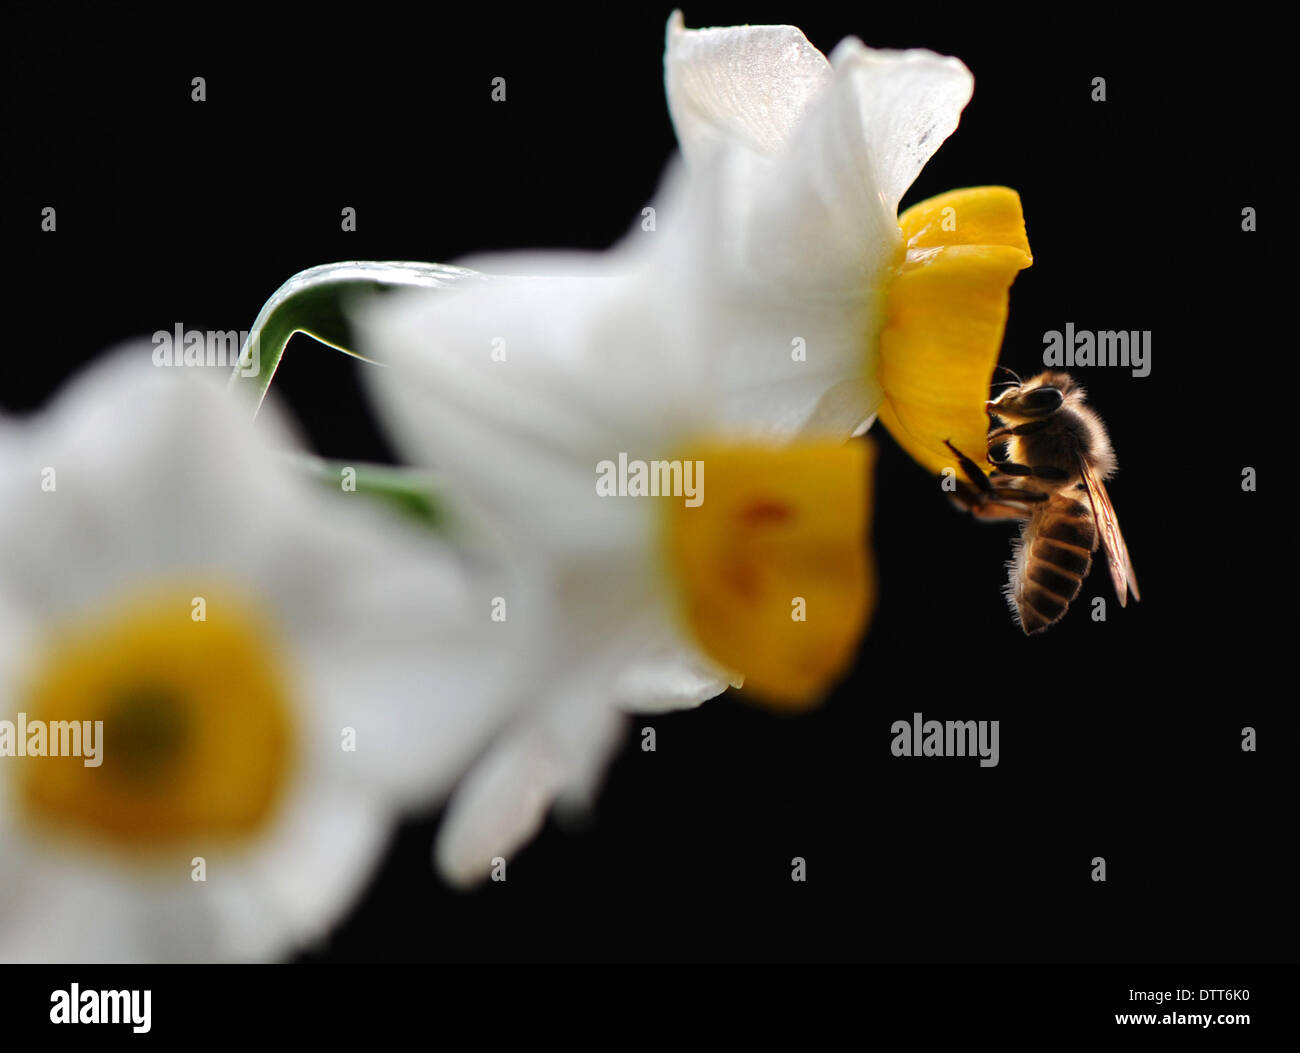 Chengdu. 28th Jan, 2014. The file photo taken on Jan. 28, 2014 shows a bee collecting honey among daffodil flowers in Chengdu, capital of southwest China's Sichuan Province. The Chengdu Plain is a primary base for China's apiculture industry. Now this industry is in a bloom thanks to the warm winter in 2013. © Xiong Xiaoli/Xinhua/Alamy Live News Stock Photo